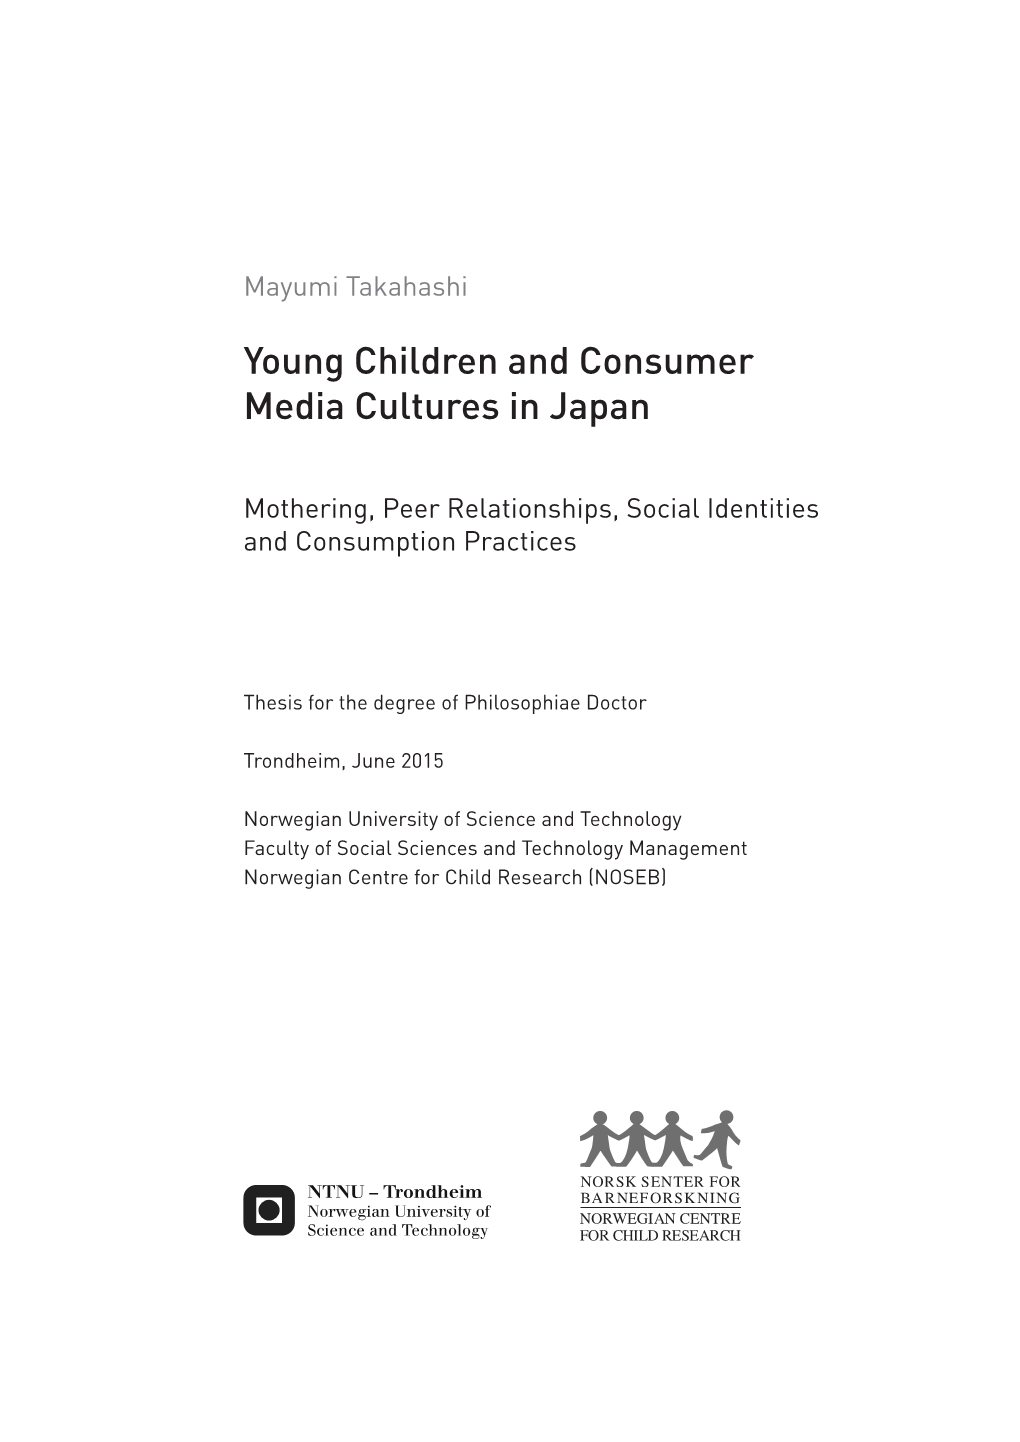 Young Children and Consumer Media Cultures in Japan